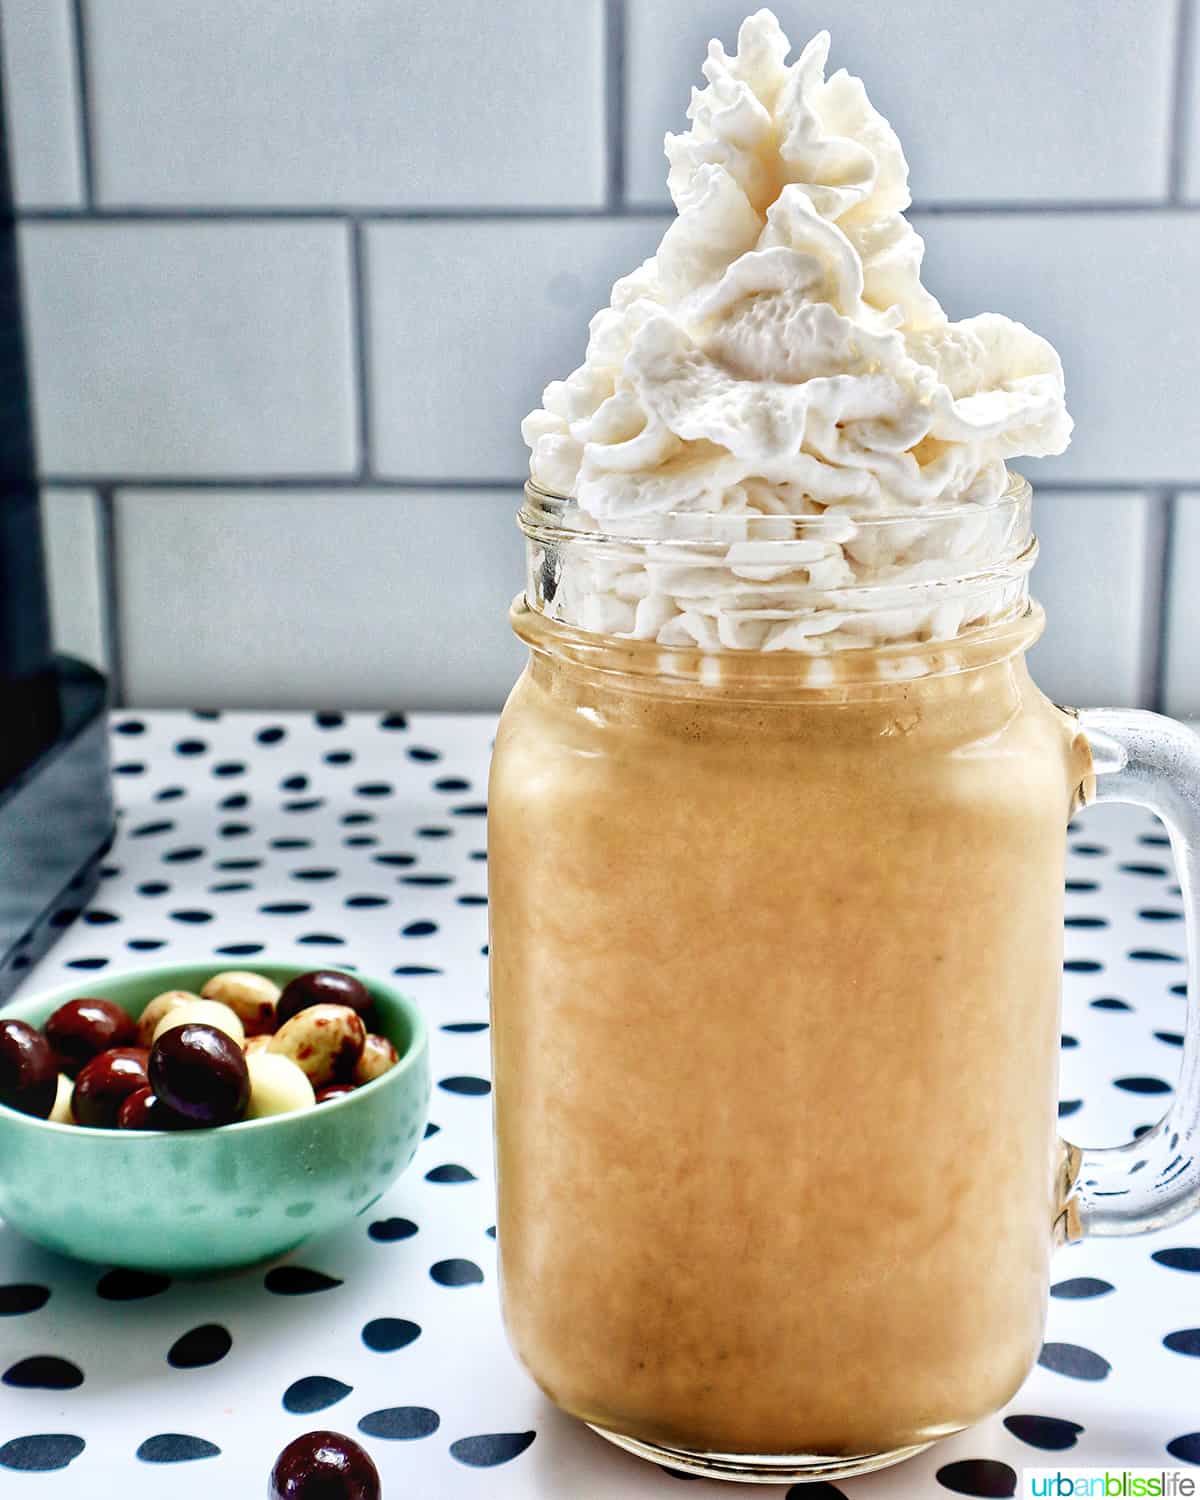 coffee milkshake in a mason jar mug with whipped cream and chocolate covered espresso beans on a polka dot table.